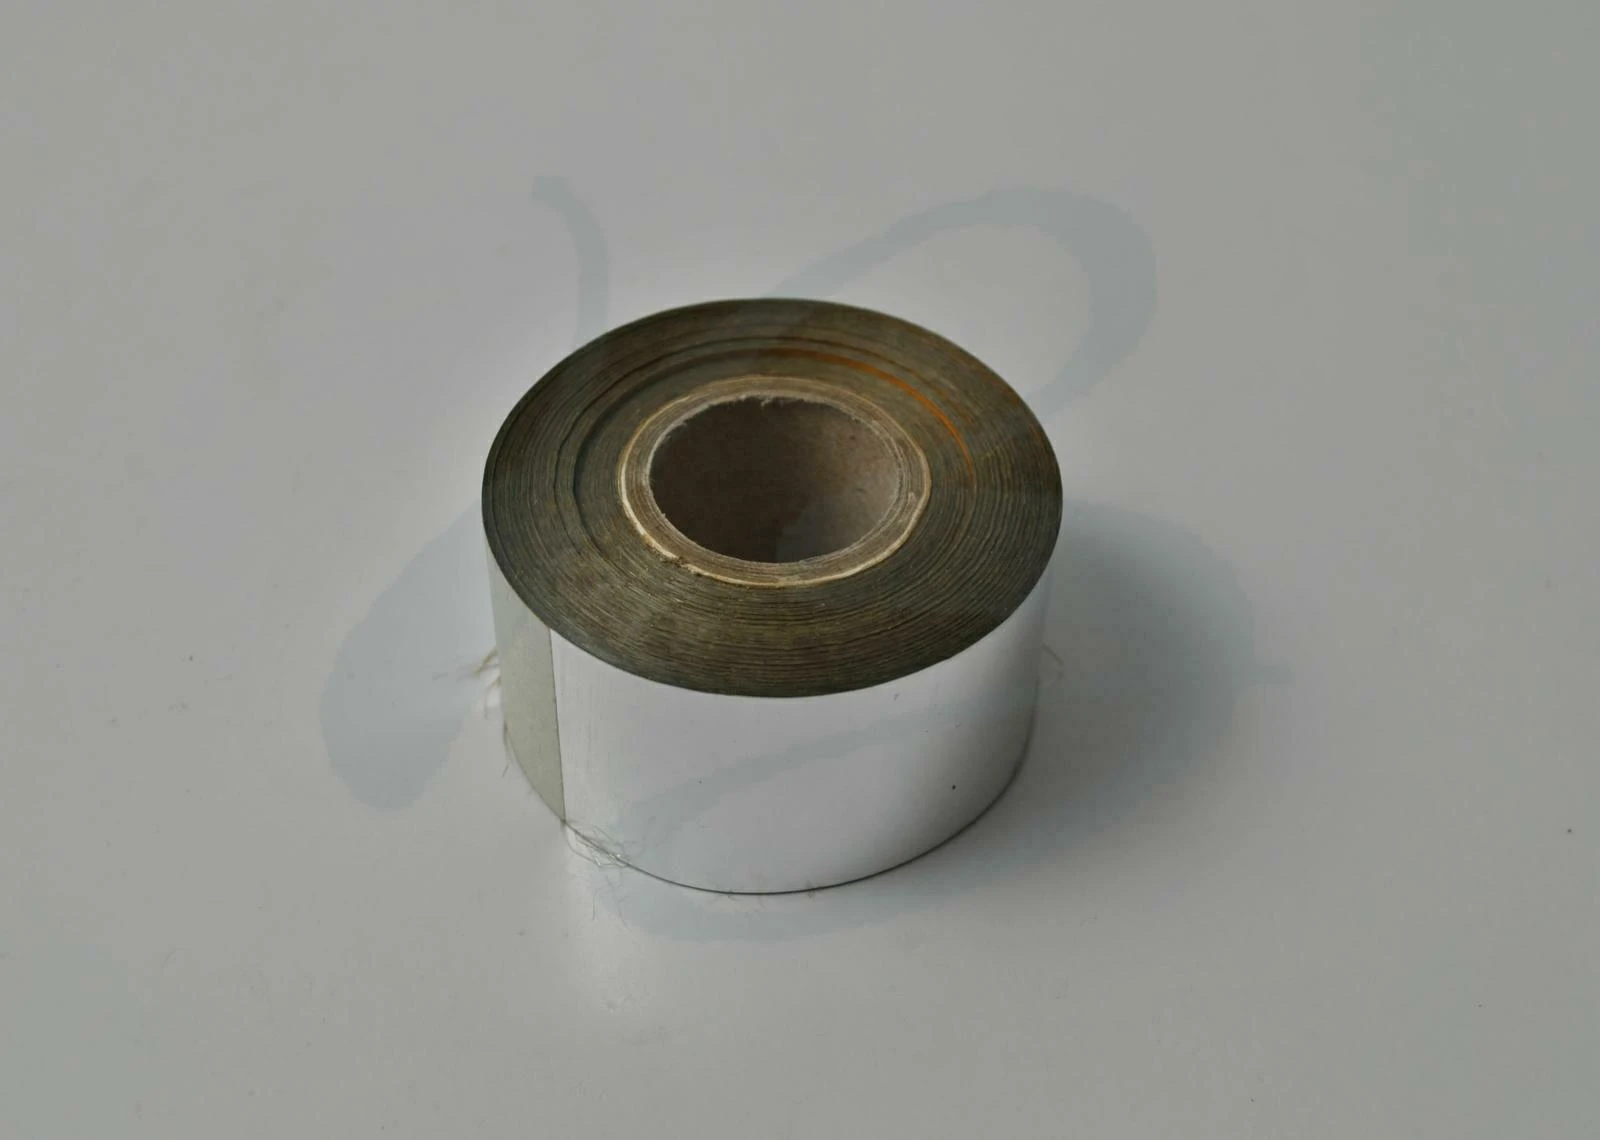 HOT PRESS TAPE SILVER COLOR 7500 MT 122 VARIOUS  SIZES